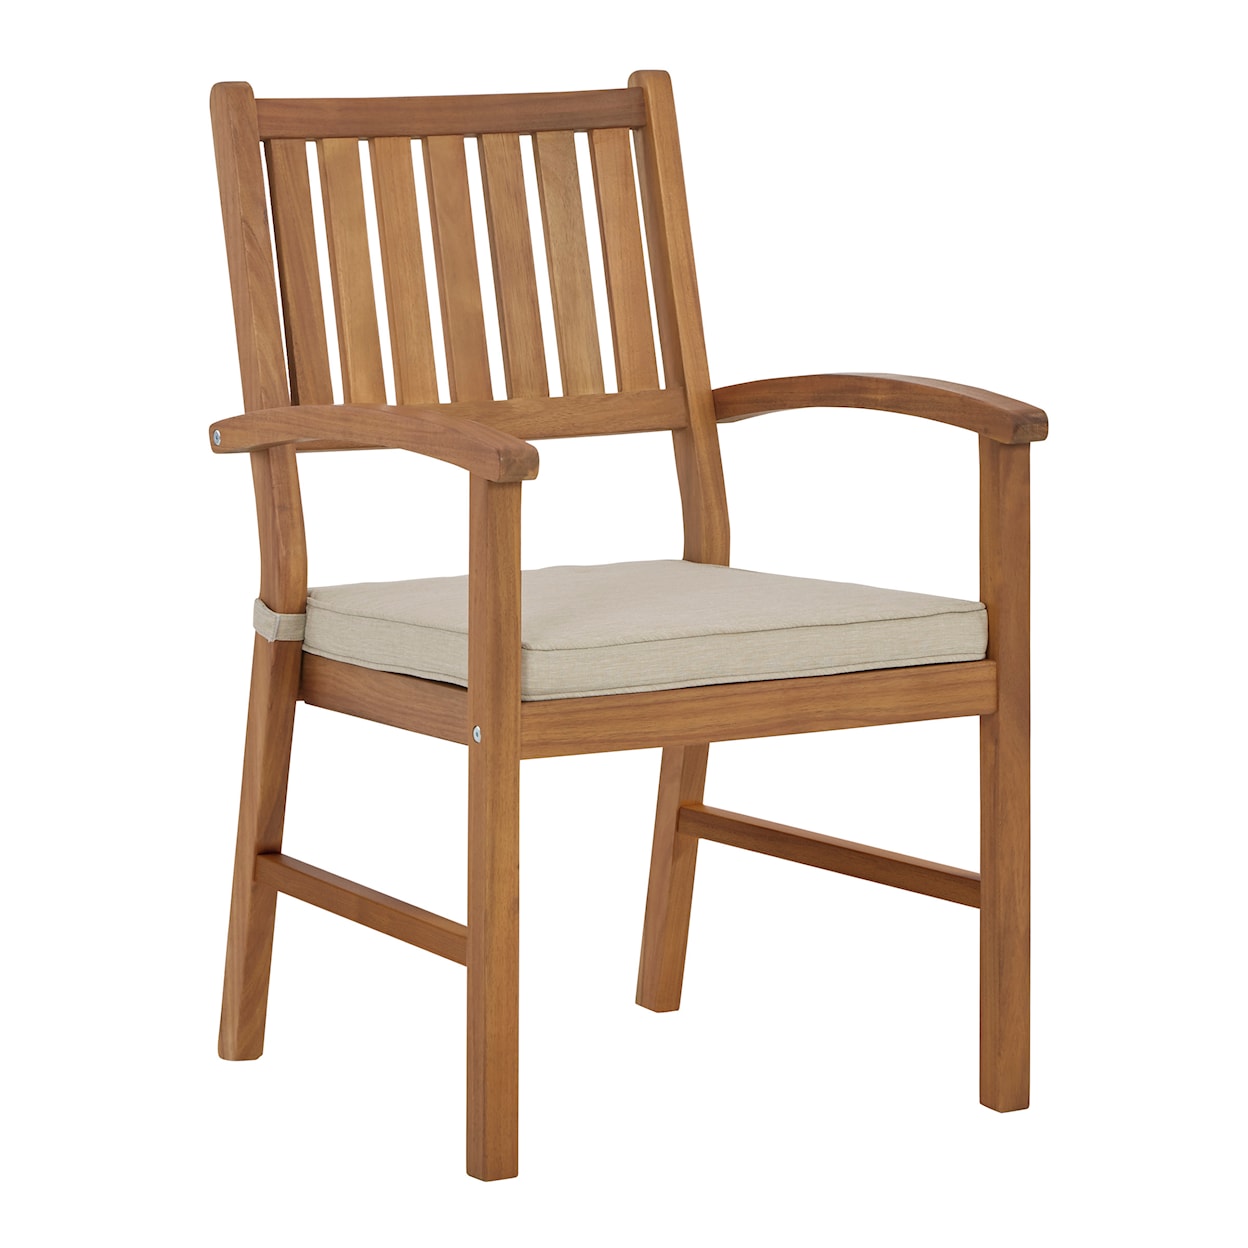 Signature Design by Ashley Janiyah Solid Acacia Wood Outdoor Dining Arm Chair